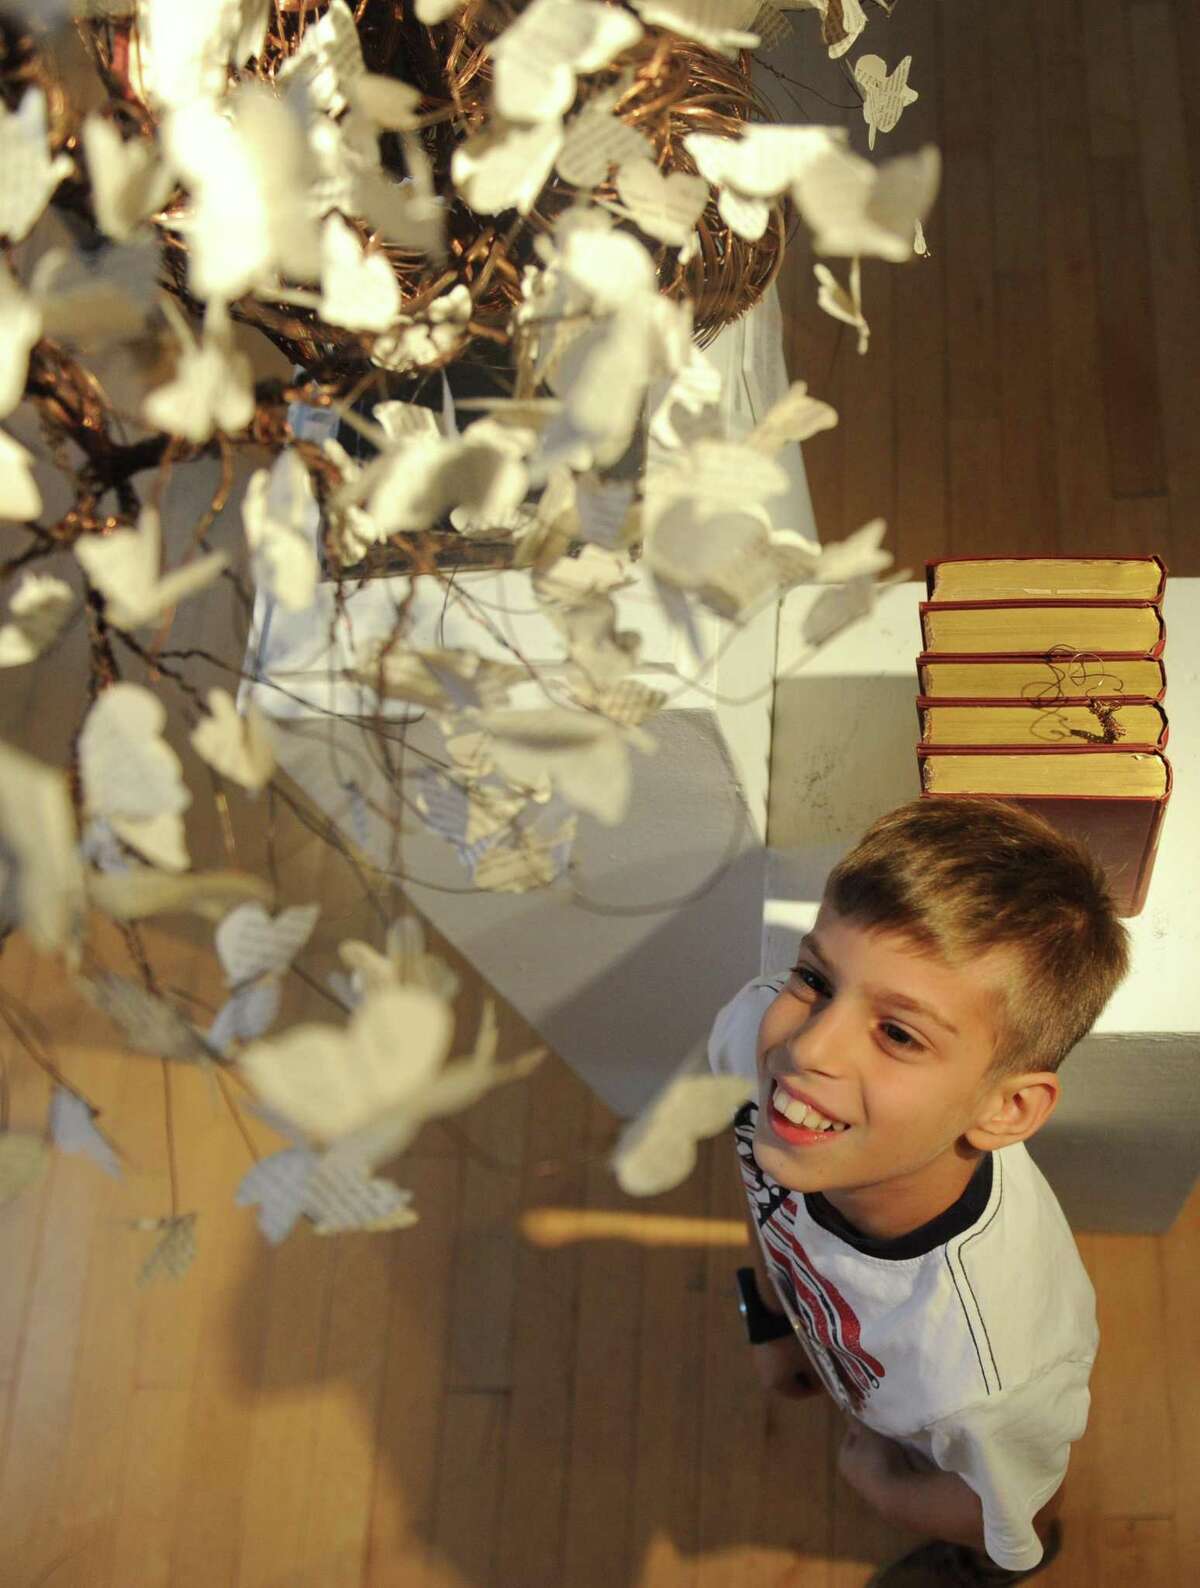 New Lebanon School fourth-grader Giorgi Kvatchanitiradze looks up at Max Neuman's installation piece "Anew" as part of the Youth@Art program at the Greenwich Arts Council's Bendheim Gallery in Greenwich, Conn. Wednesday, Oct. 25, 2017. The Bendheim Gallery's exhibition "Flower Stories" featuring contemporary artists' perception of flowers in a variety of mediums will run through Nov. 15.